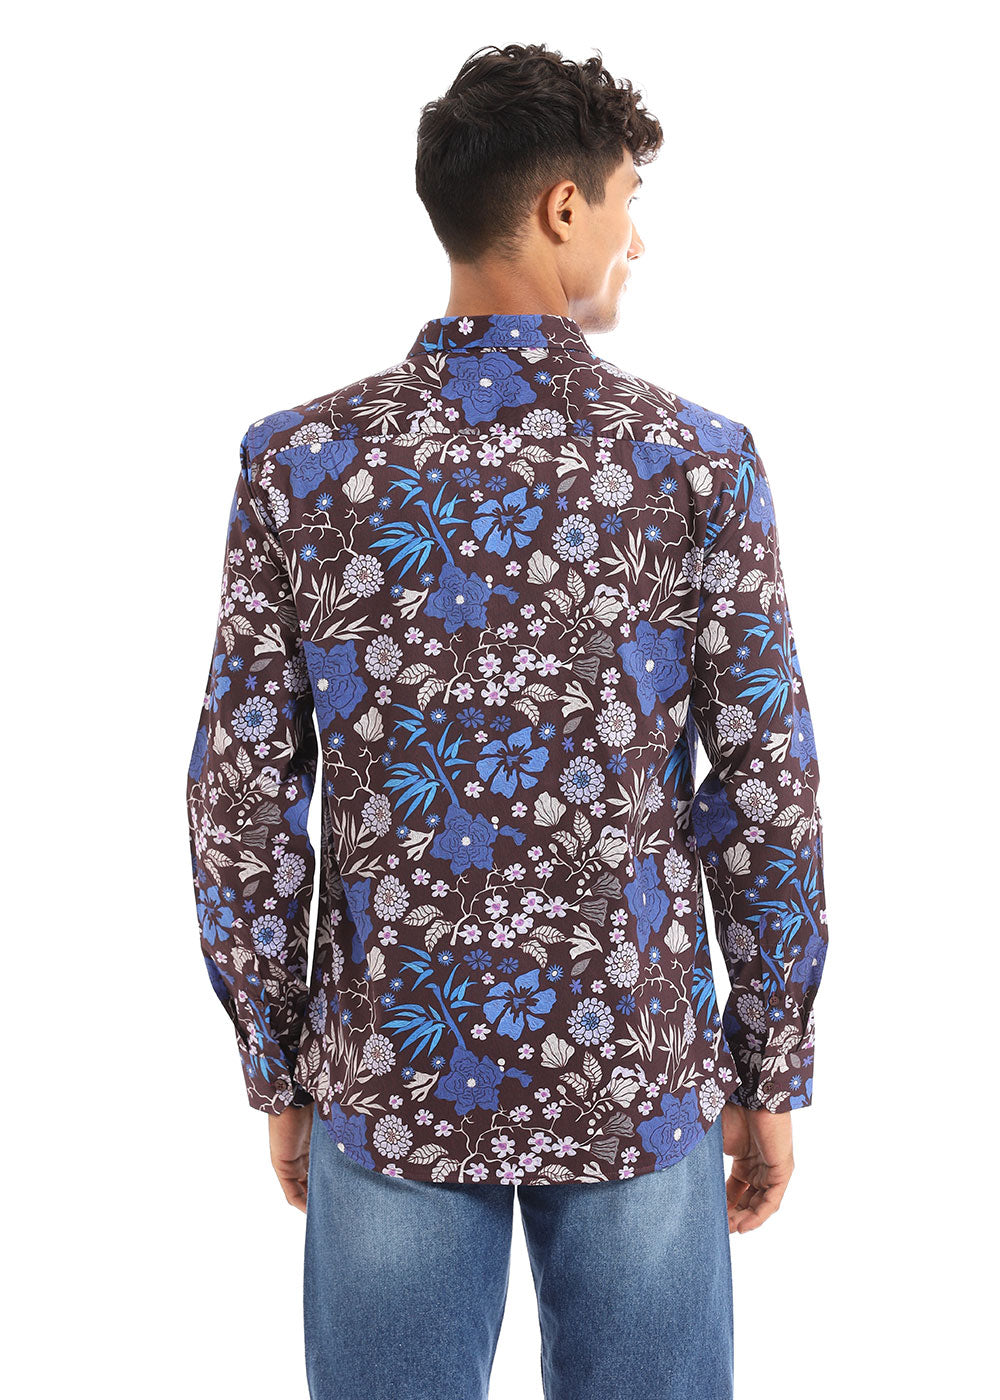 Back All Over Floral Printed Full Sleeve Shirt 